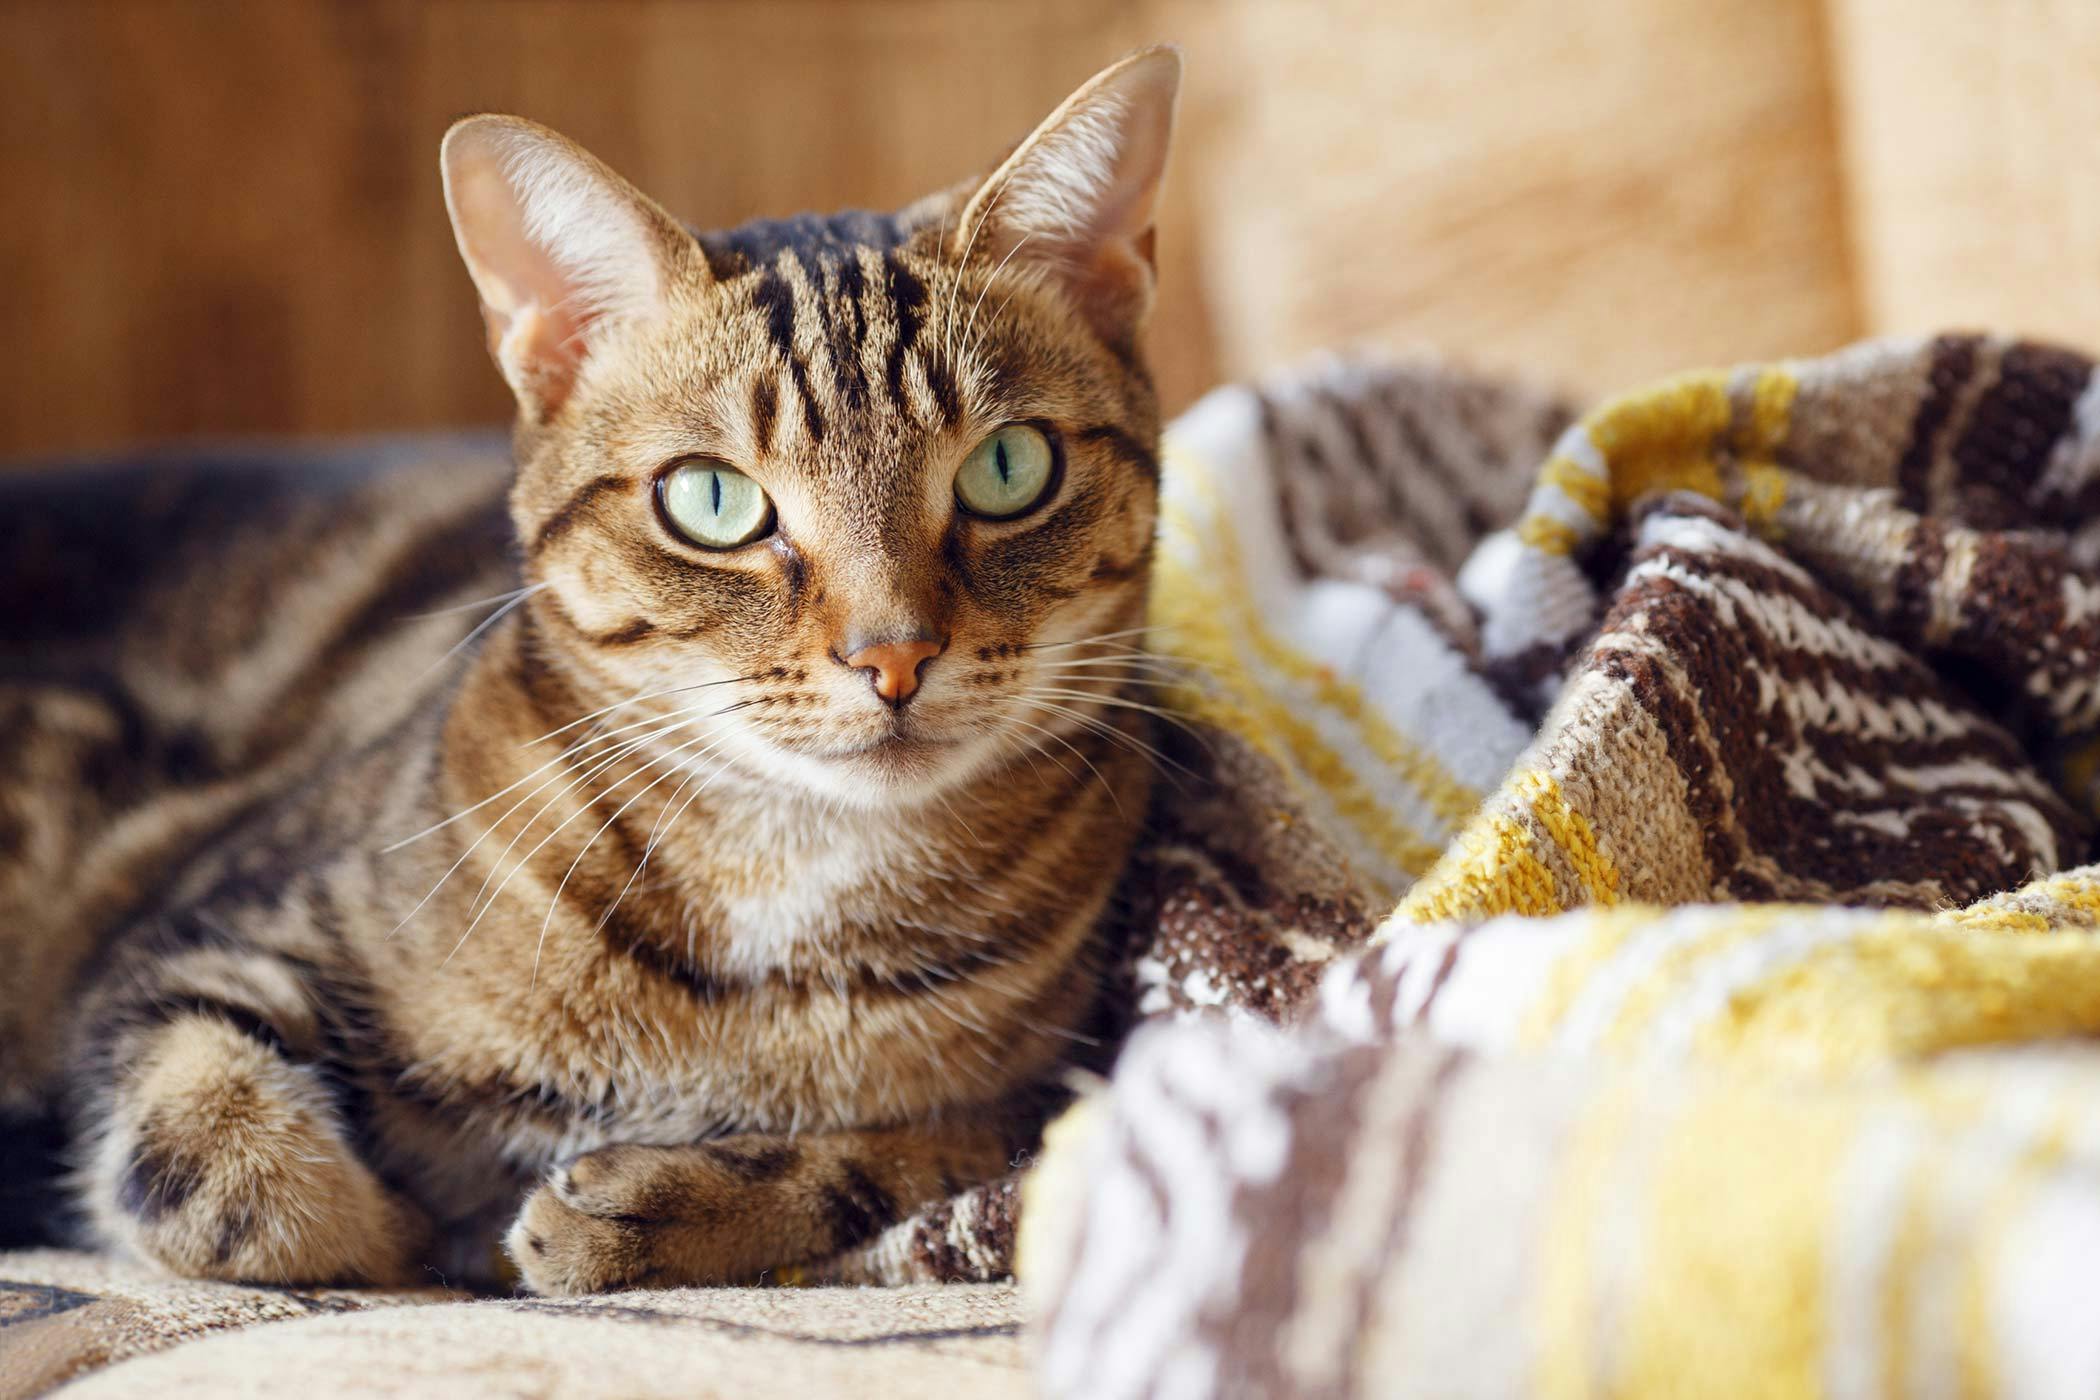 Feline Herpesvirus Infection in Cats Symptoms, Causes, Diagnosis